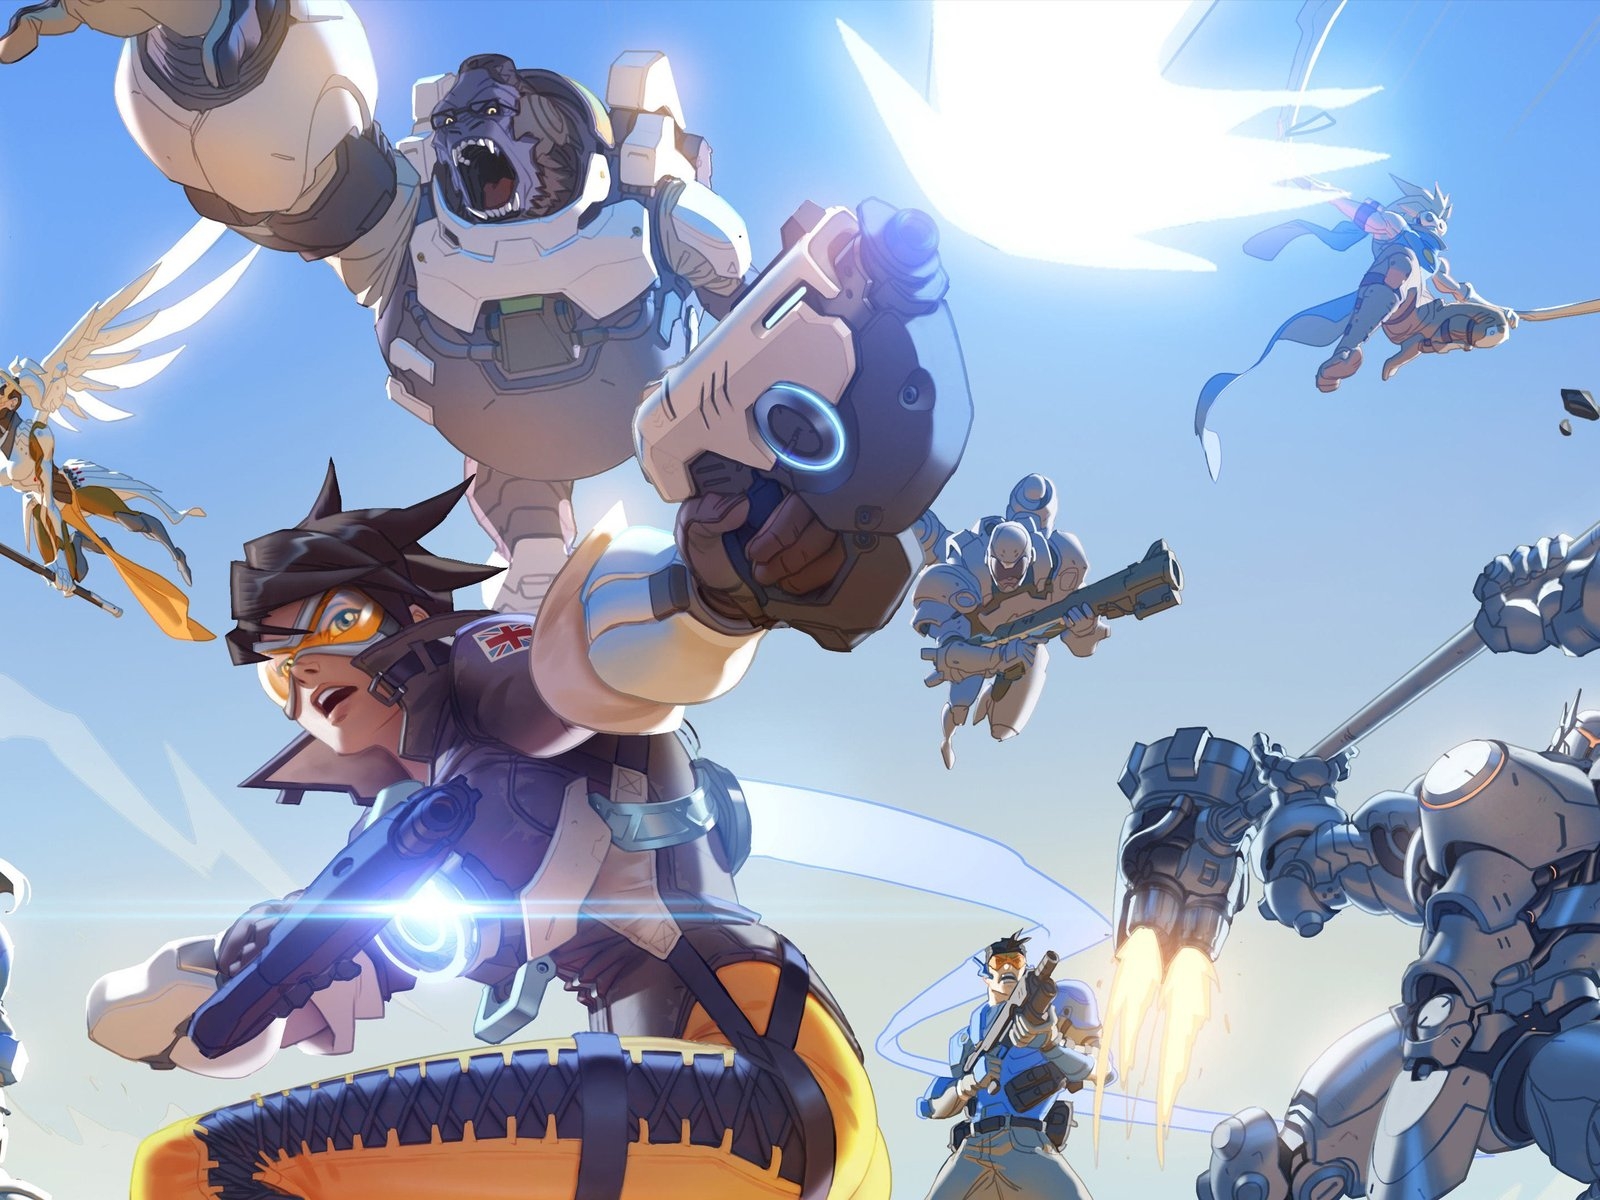 Overwatch Game for 1600 x 1200 resolution